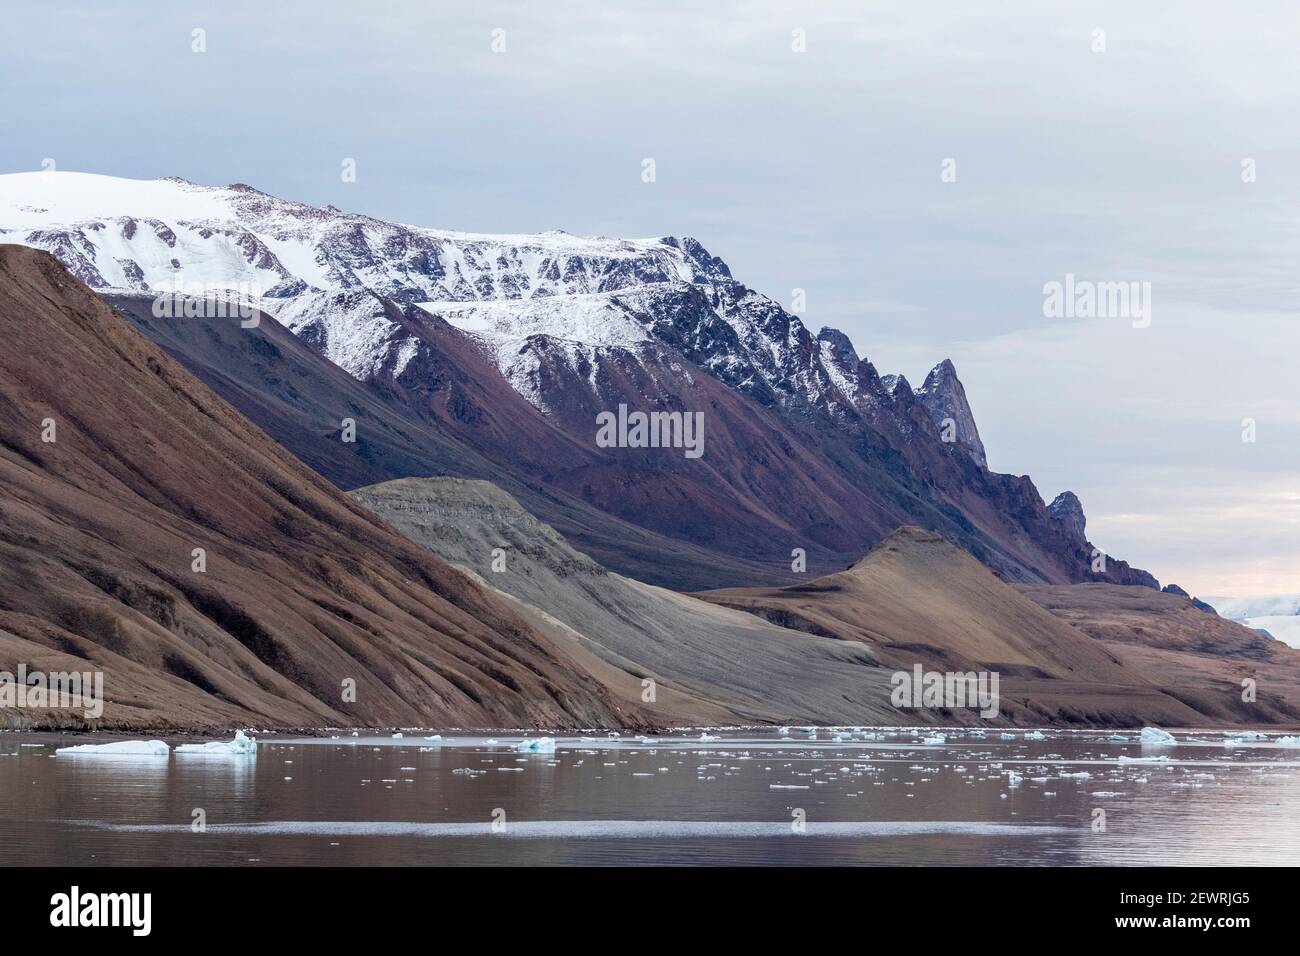 Reflections in the calm waters of Makinson Inlet, Ellesmere Island, Nunavut, Canada, North America Stock Photo